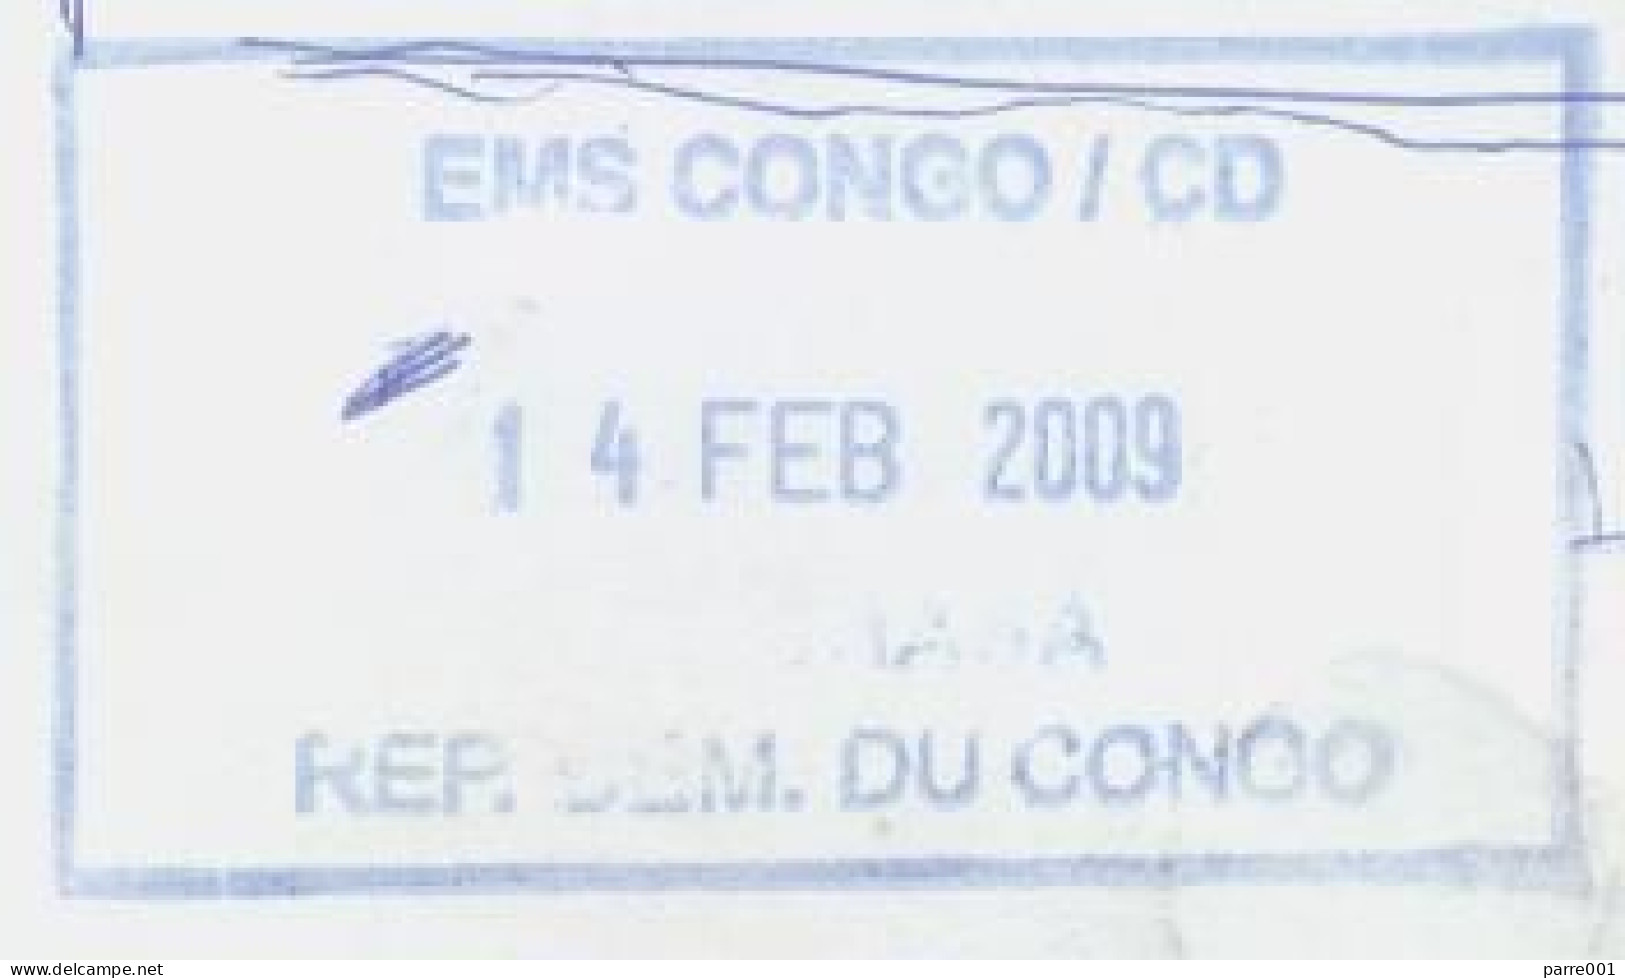 DRC Congo 2009 Beni EMS Label Kinshasa Via Goma With CAA Airline Includes Lead Sealing Weight. Rare - Lettres